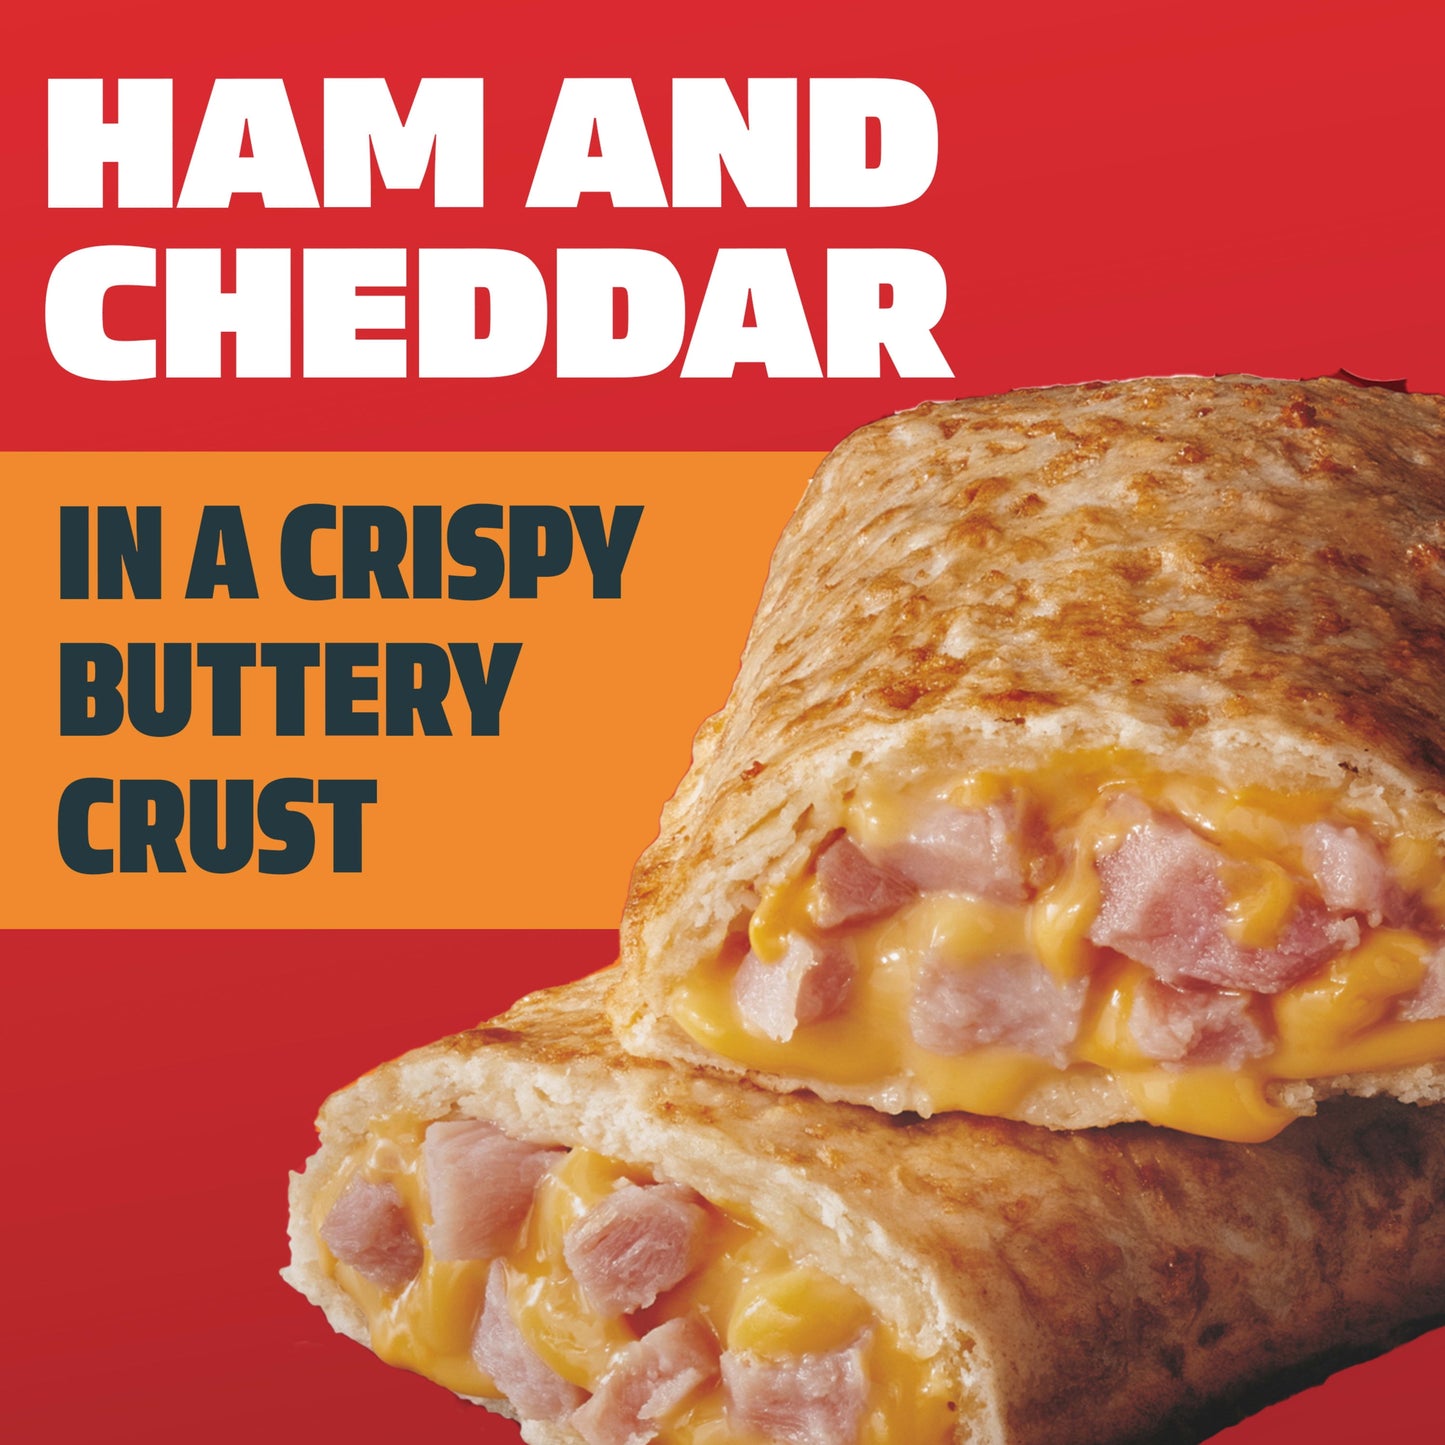 Hot Pockets Frozen Snacks, Hickory Ham and Cheddar Cheese, 2 Regular Sandwiches (Frozen)